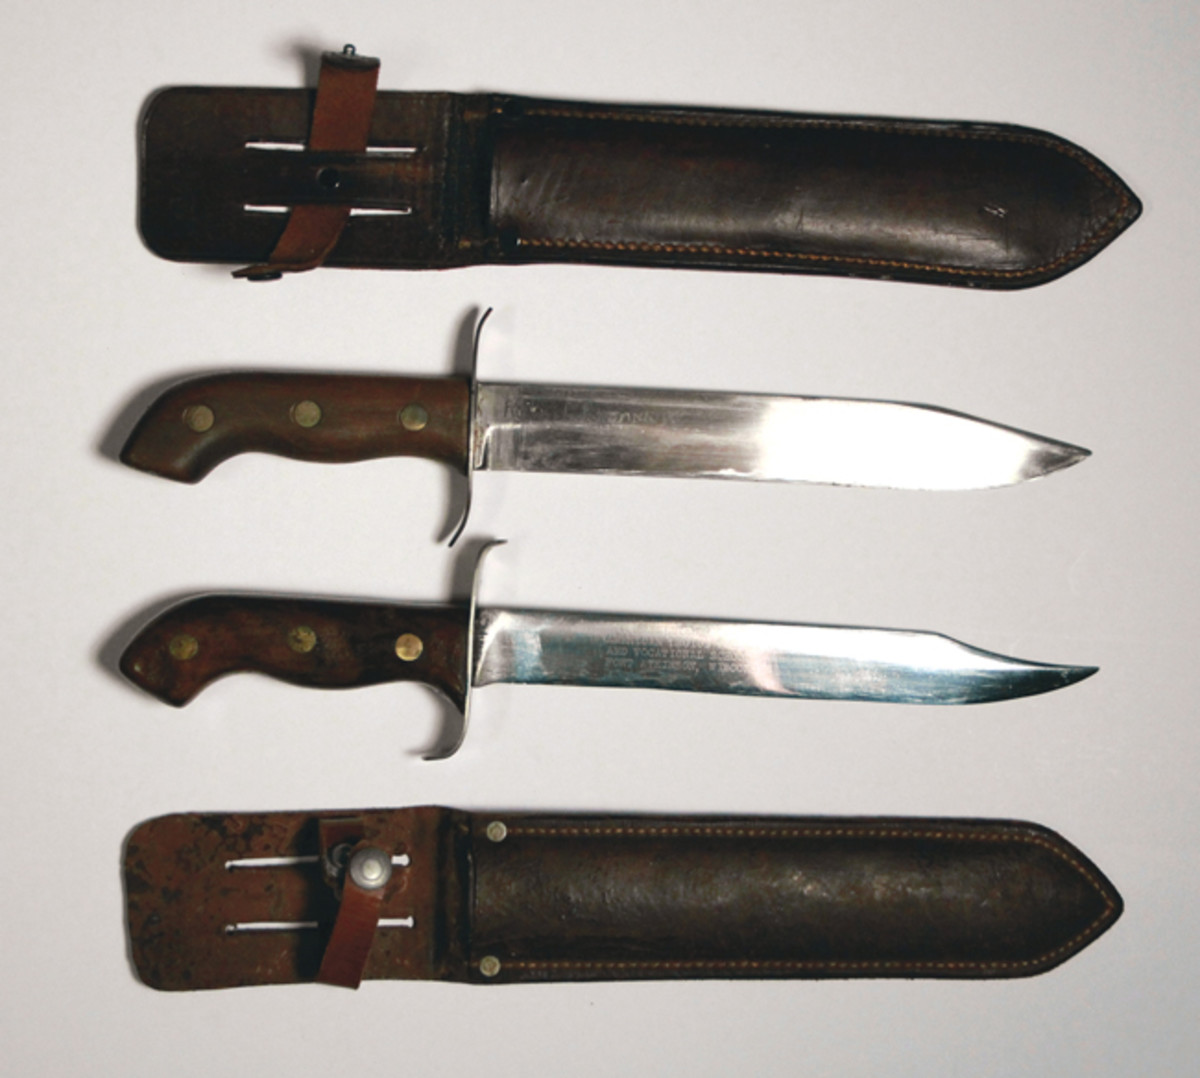 The differences between the knives made at Fond du Lac and Fort Atkinson are most apparent when you compare the shape and finish of the blades.